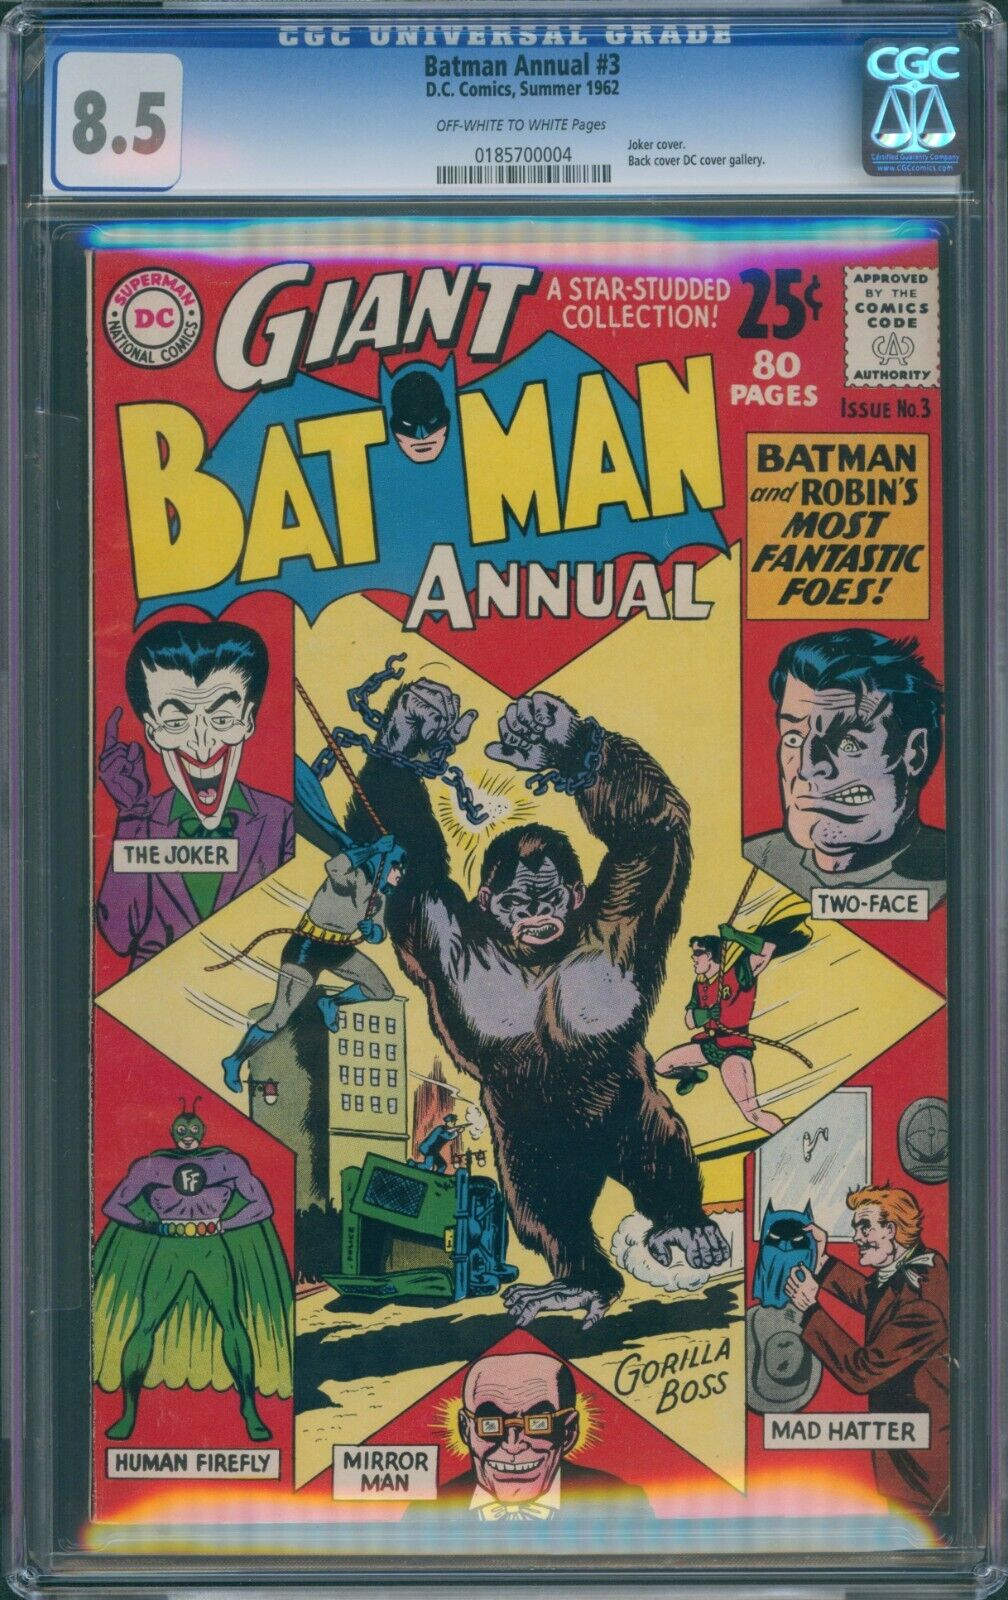 BATMAN ANNUAL #3 CGC 8.5 GIANT SIZE 80 PAGES JOKER TWO-FACE COVER DC COMICS 1962